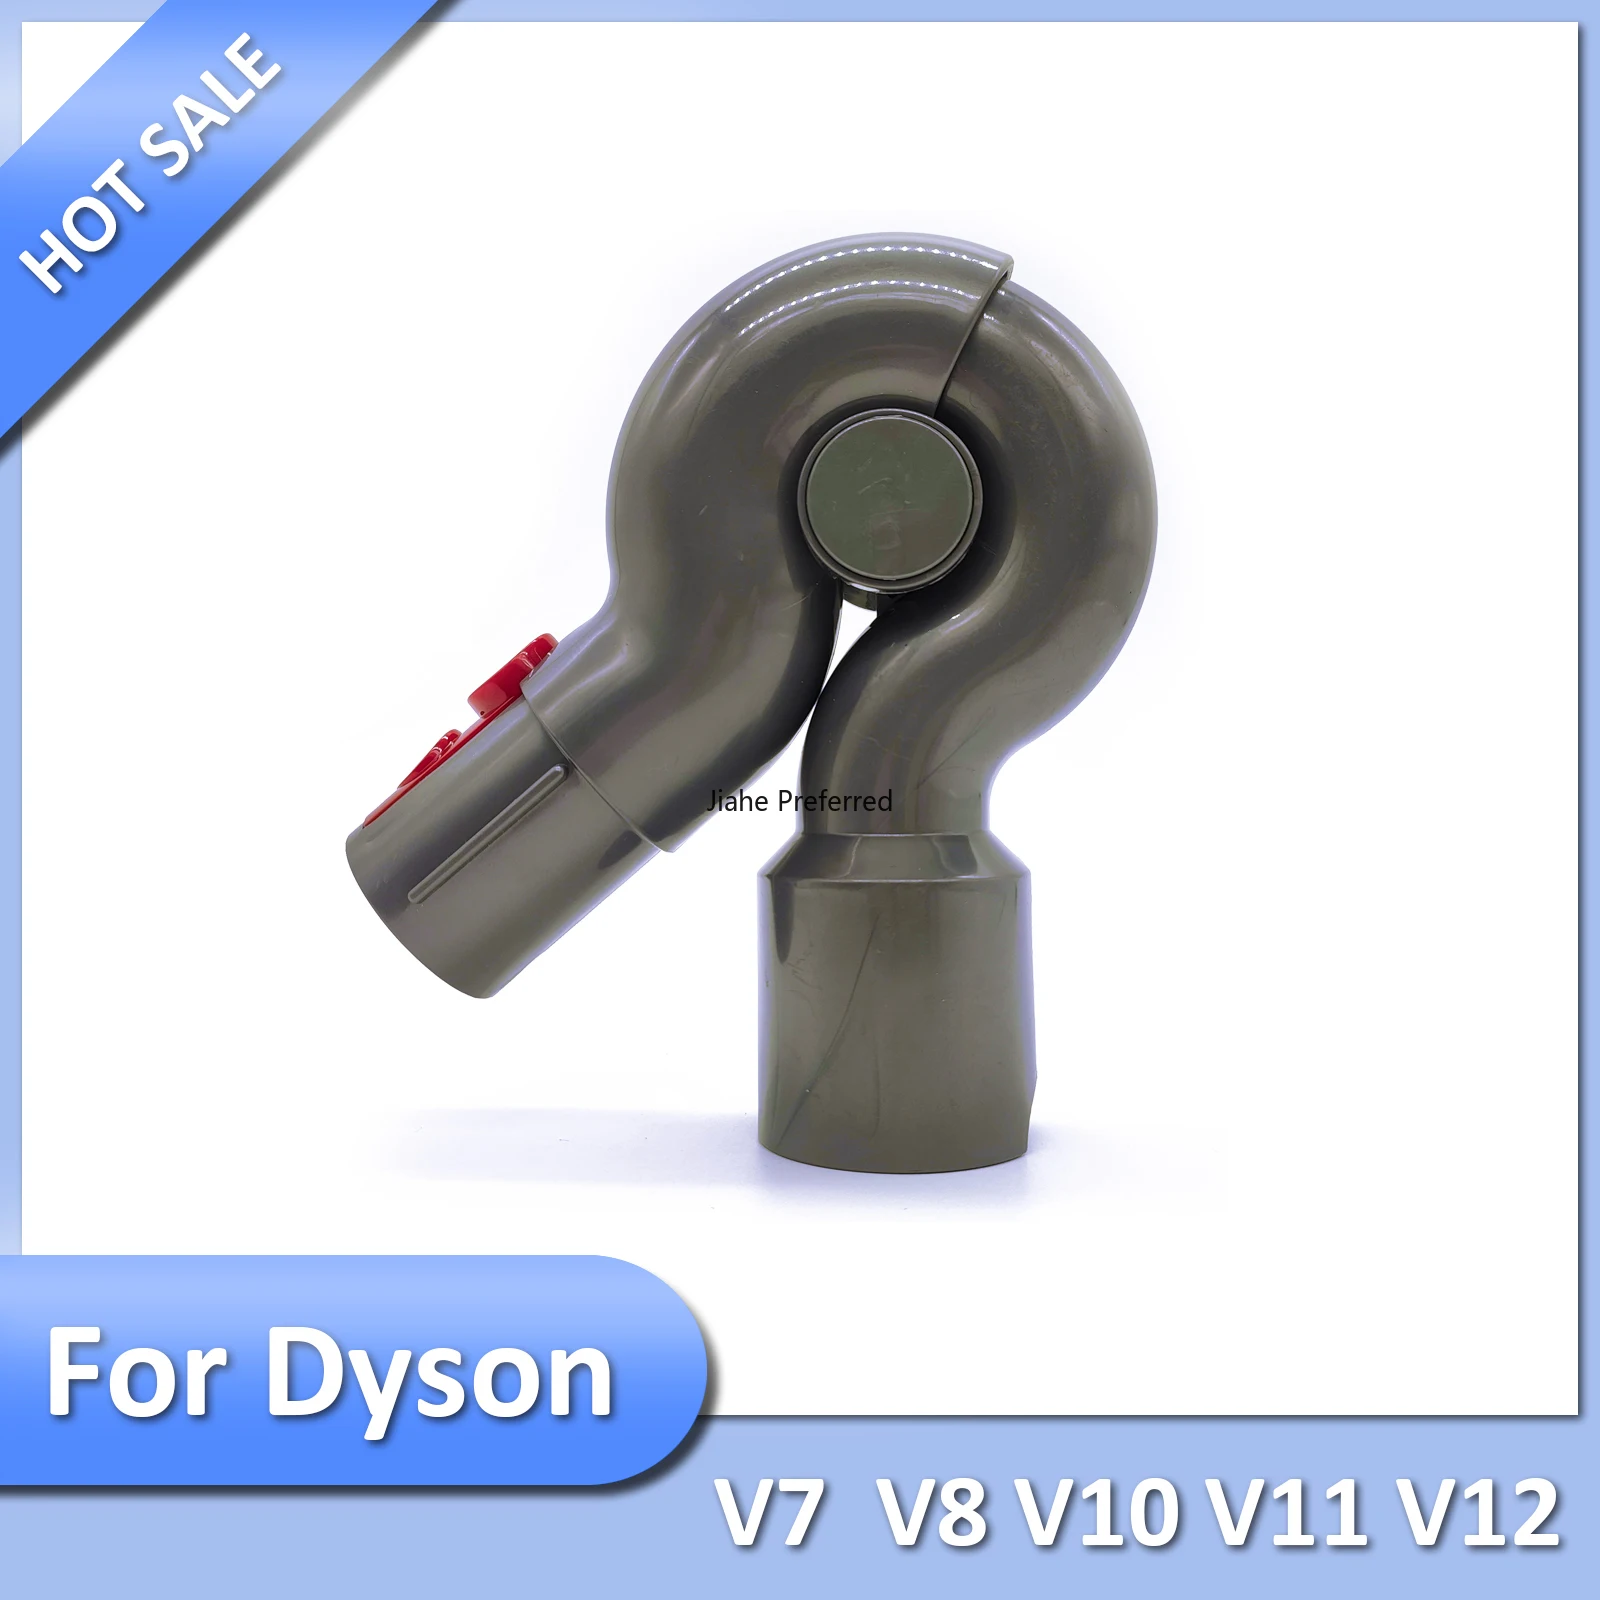 

Vacuum Cleaners For Dyson V7 V8 V10 V11 V12 Top Adjustable Adapter Head Attachment Compatible Quick Release Up Top Adaptor Tool